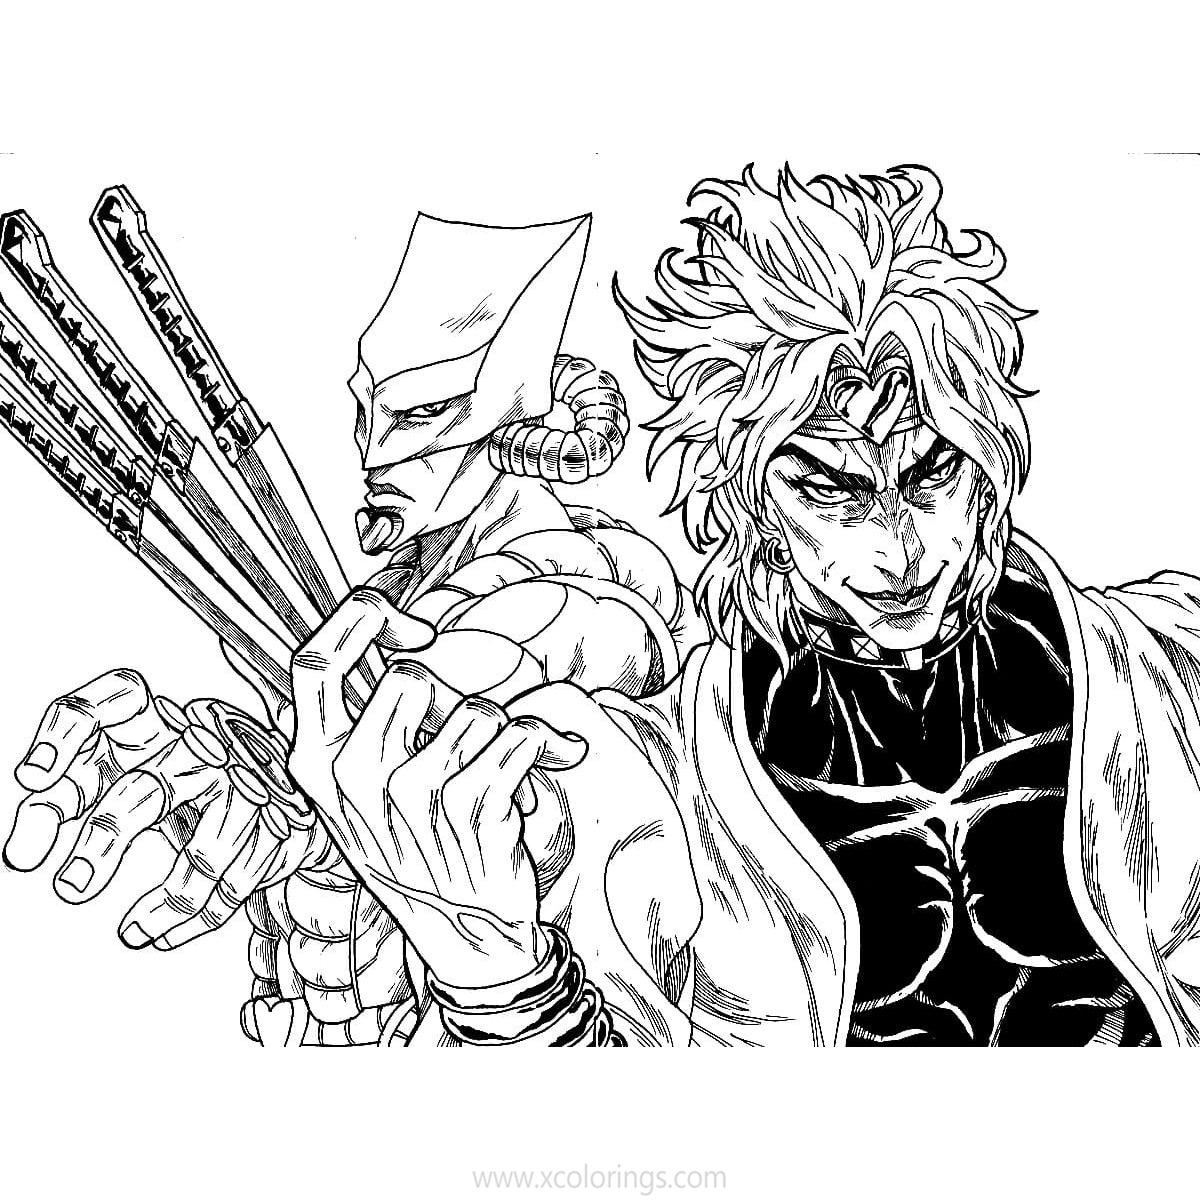 Free JoJo's Bizarre Adventure Coloring Pages Mir and Dio printable